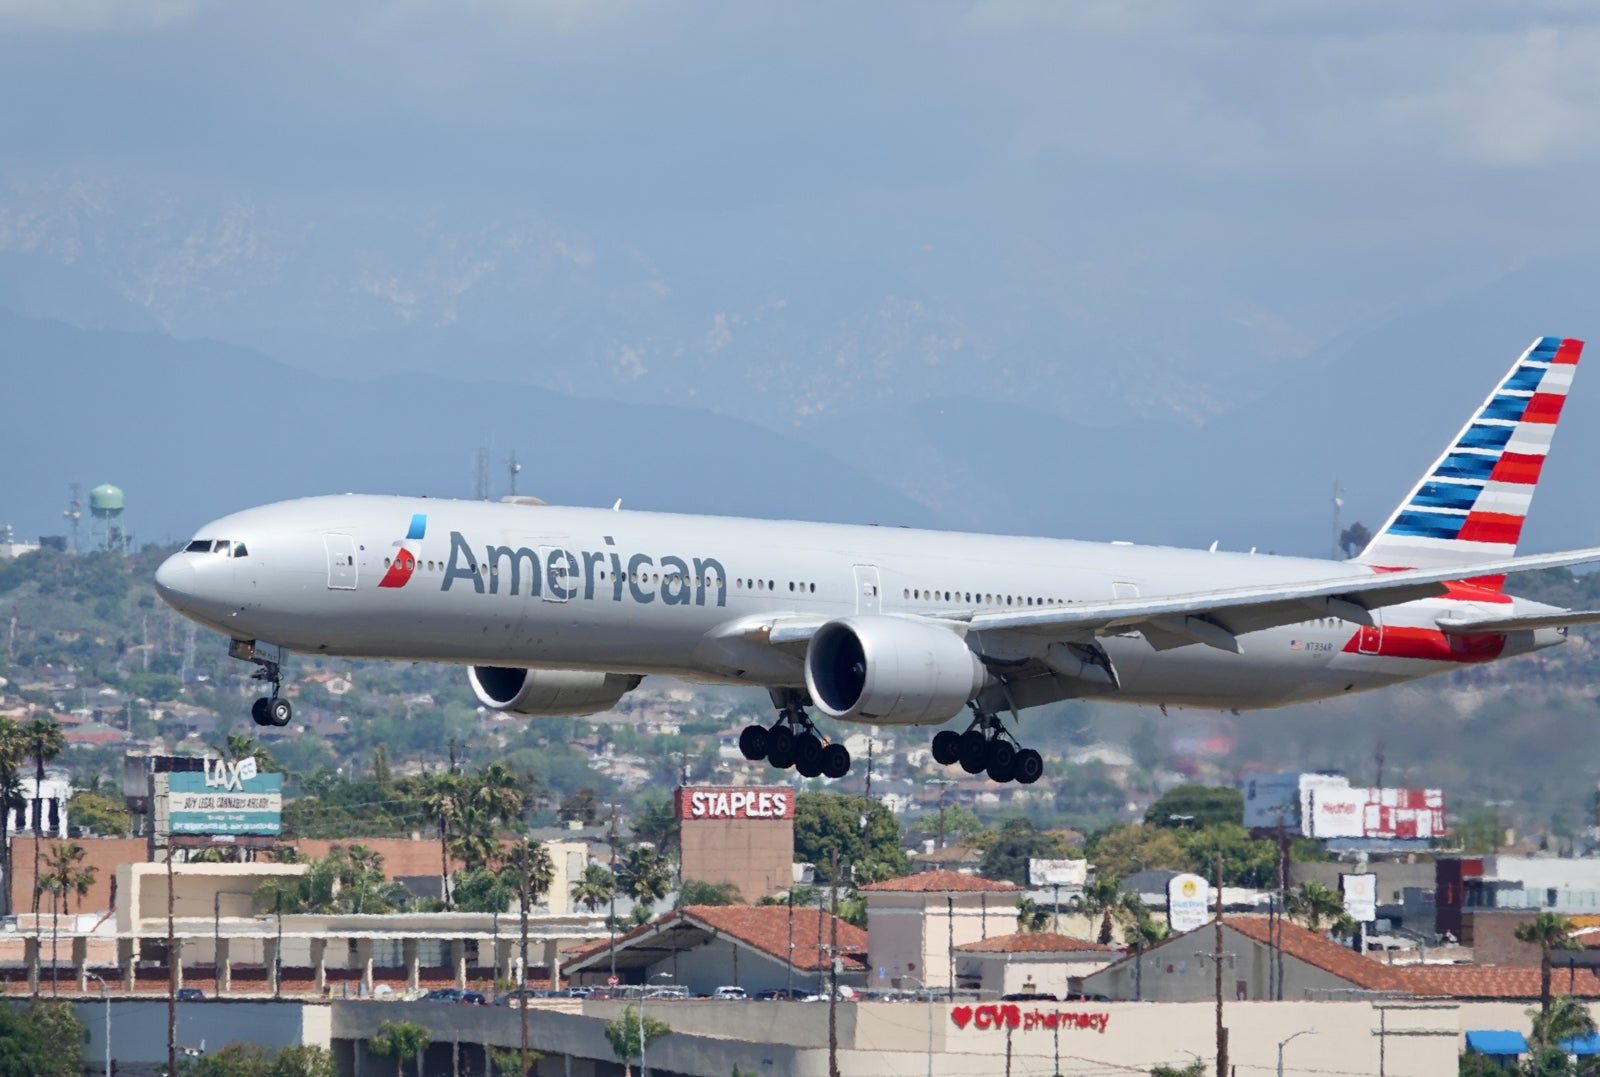 Guide to changing or canceling American Airlines flights